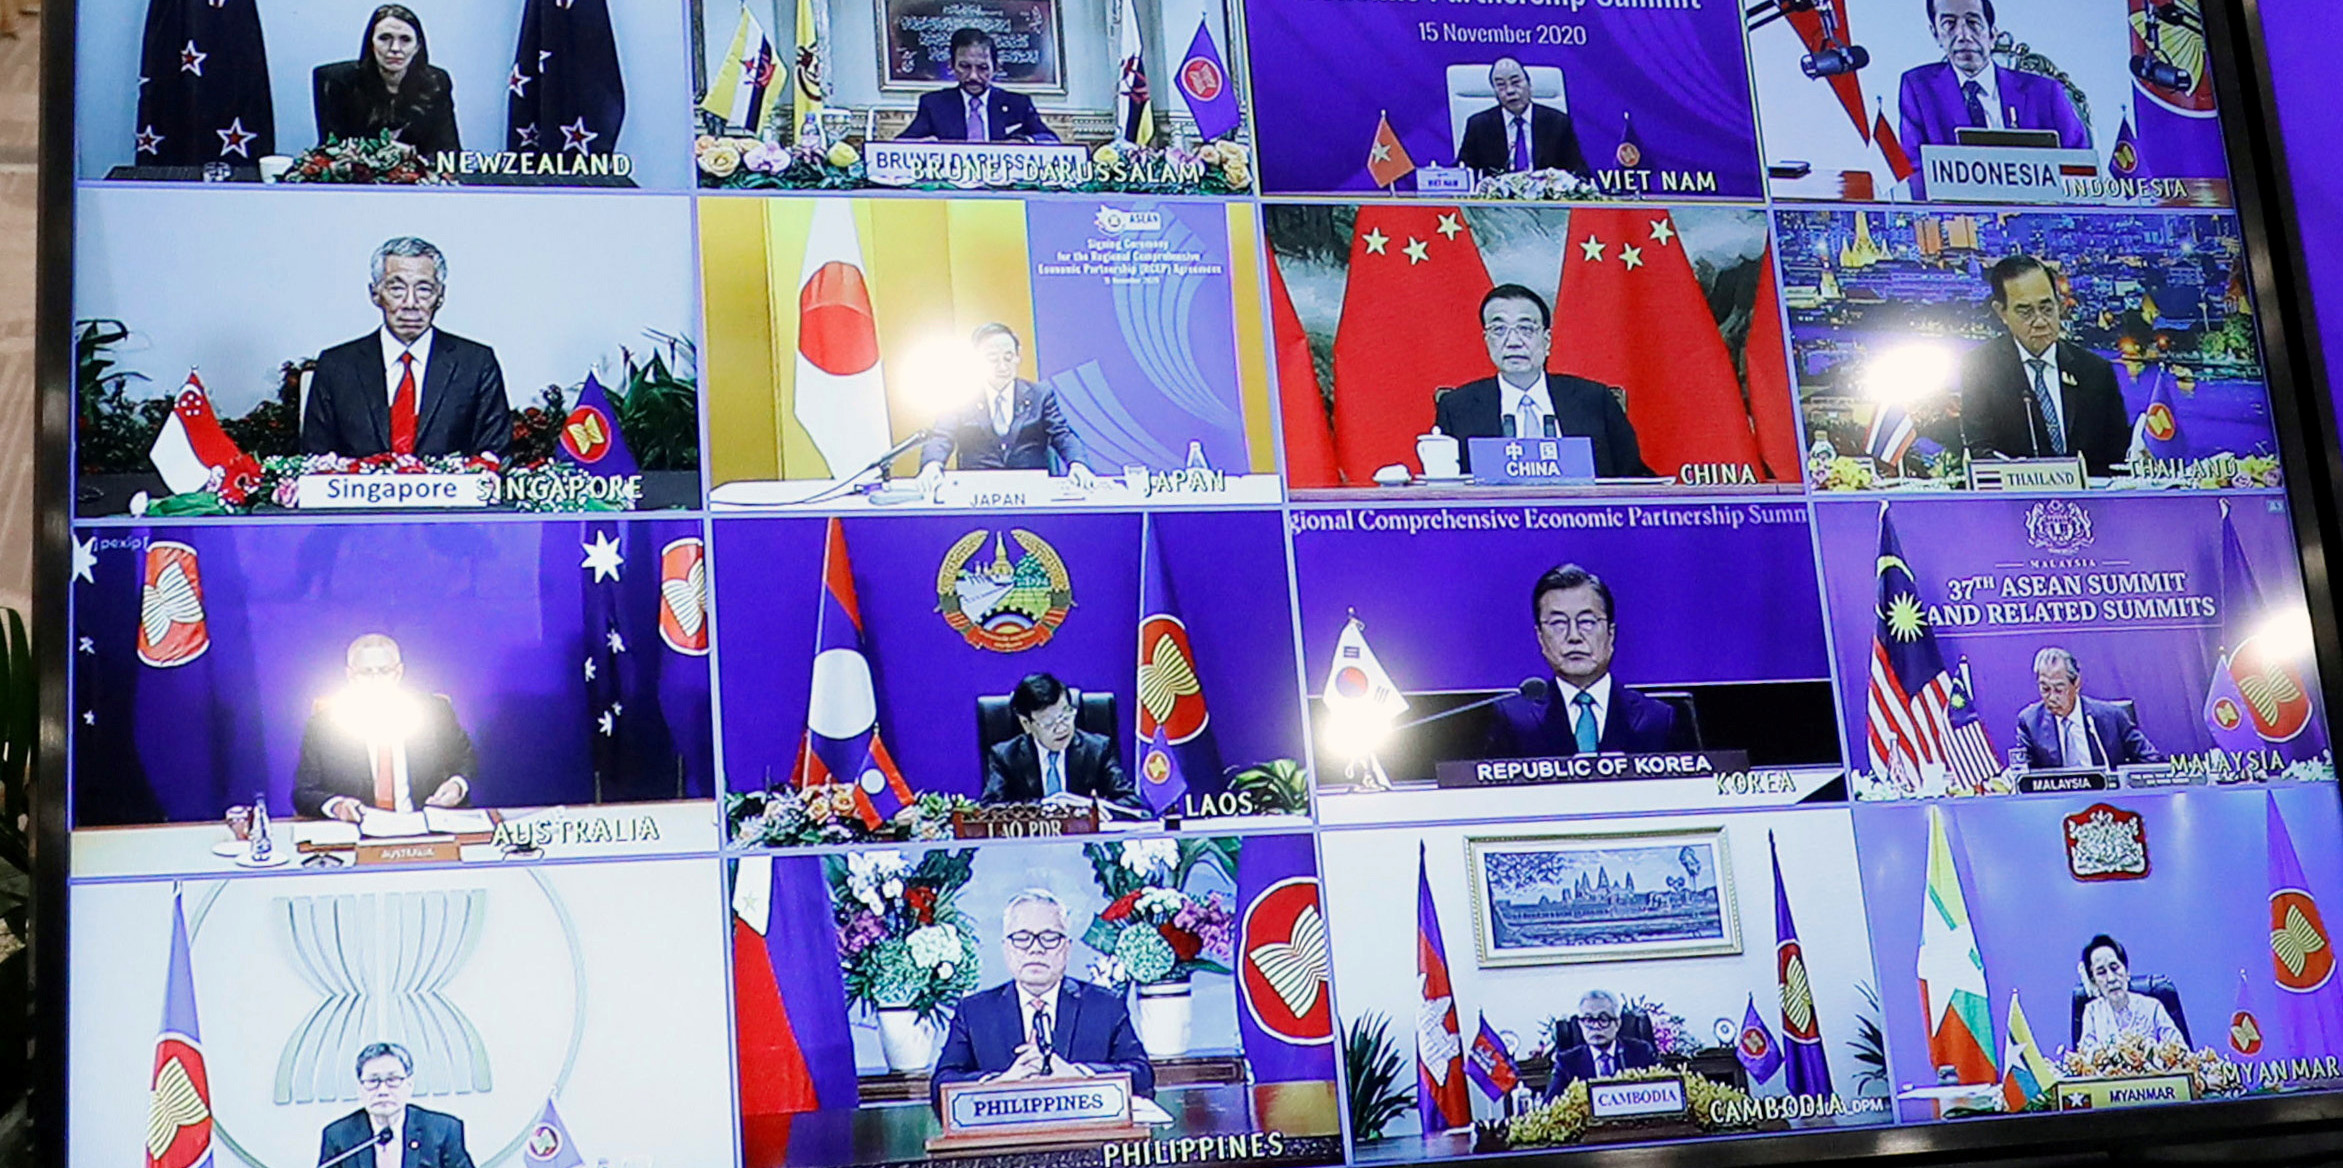 ASEAN heads of state attend the 37th ASEAN Summit remotely in November 2020.